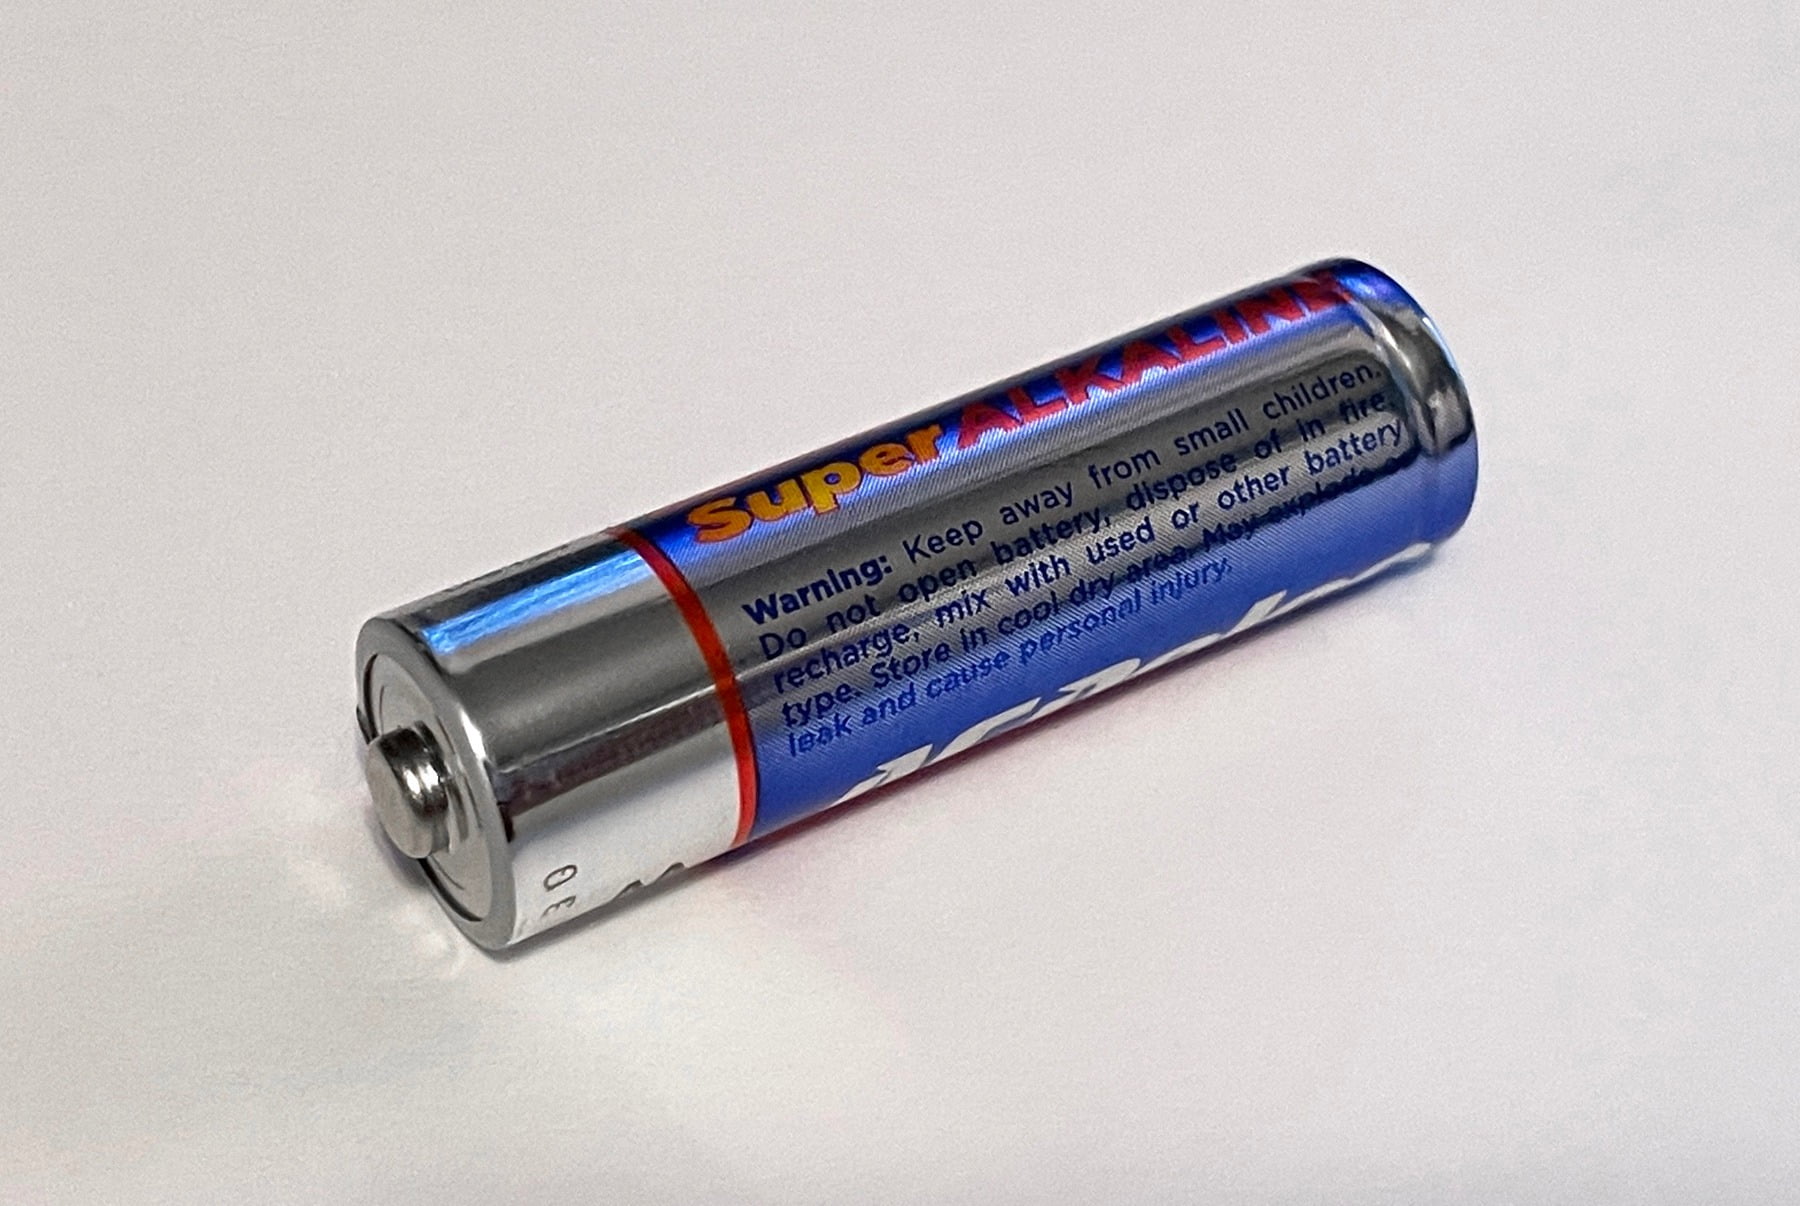 Figure 5. If surface texture is included in the cylindricity evaluation of this AA battery, the measurement would require more than 2,800,000,000 data points. 